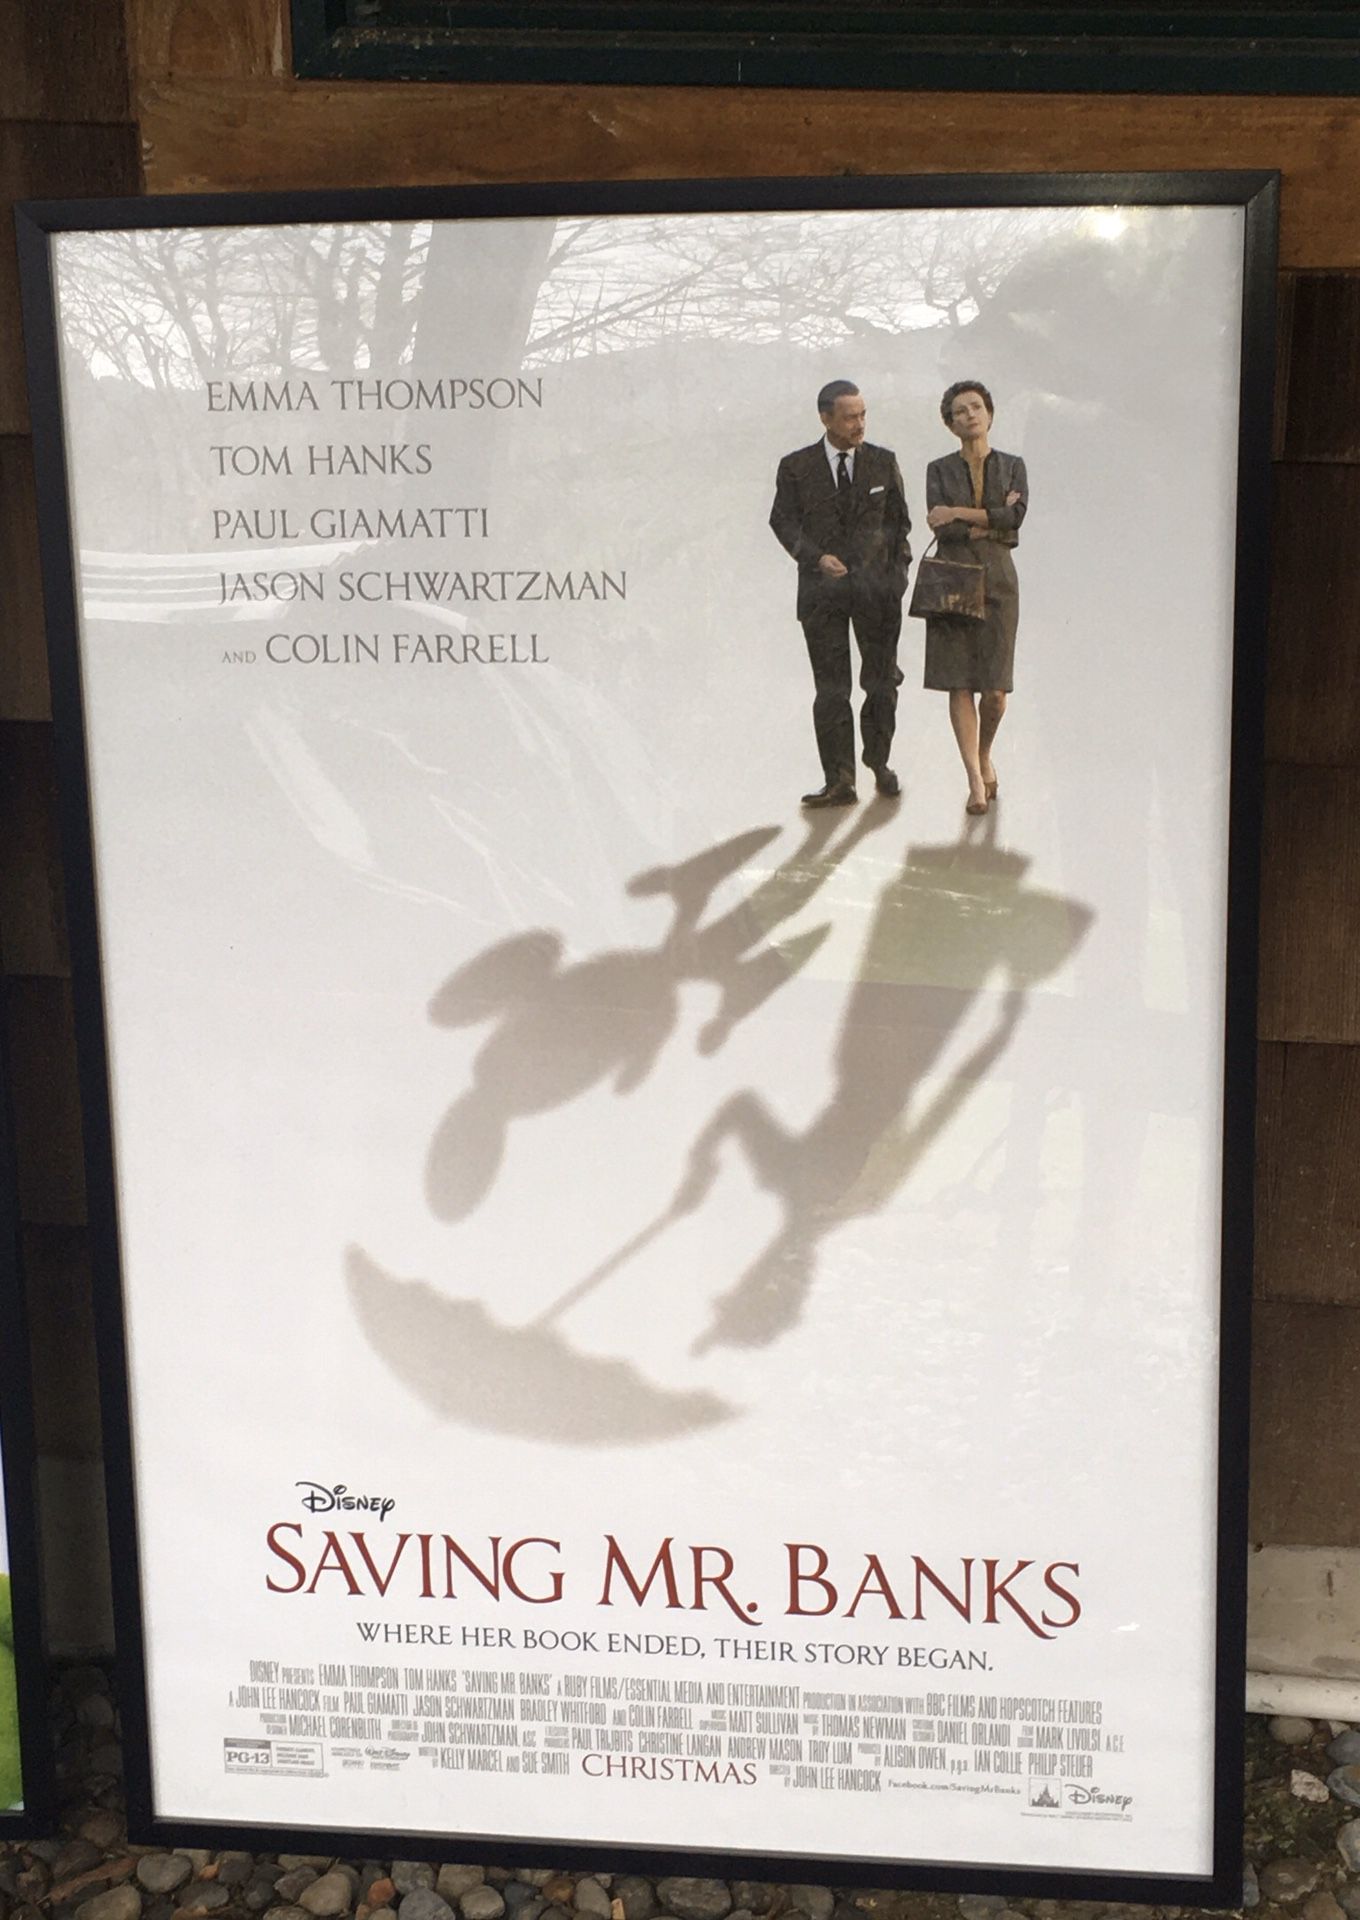 Authentic Movie Theater Promotional Poster - Disney Saving Mr. Banks